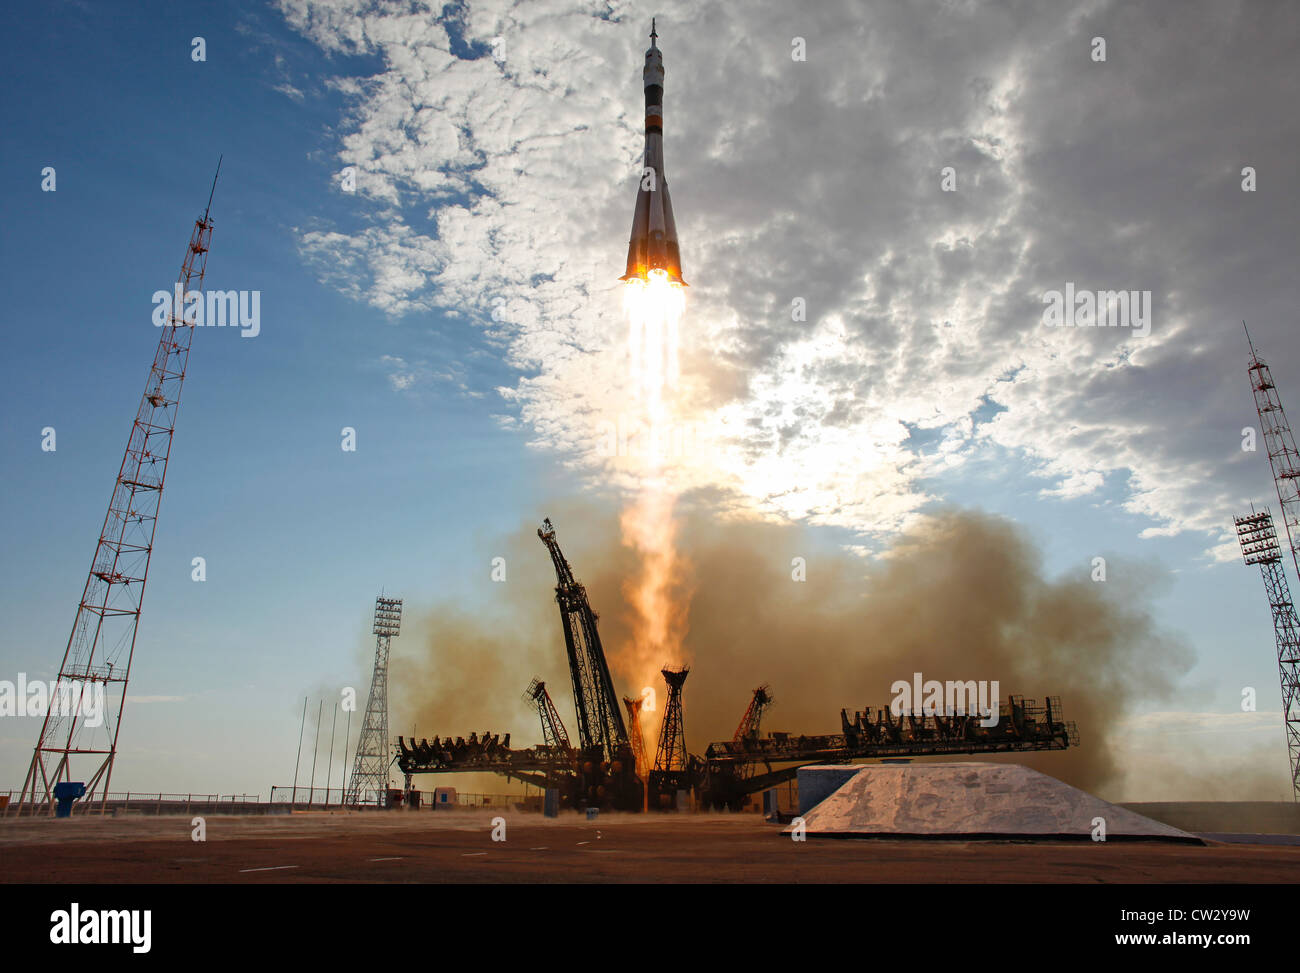 Soyuz TMA-05M rocket launches from the Baikonur Cosmodrome in Kazakhstan carrying Expedition 32 to International Space station Stock Photo